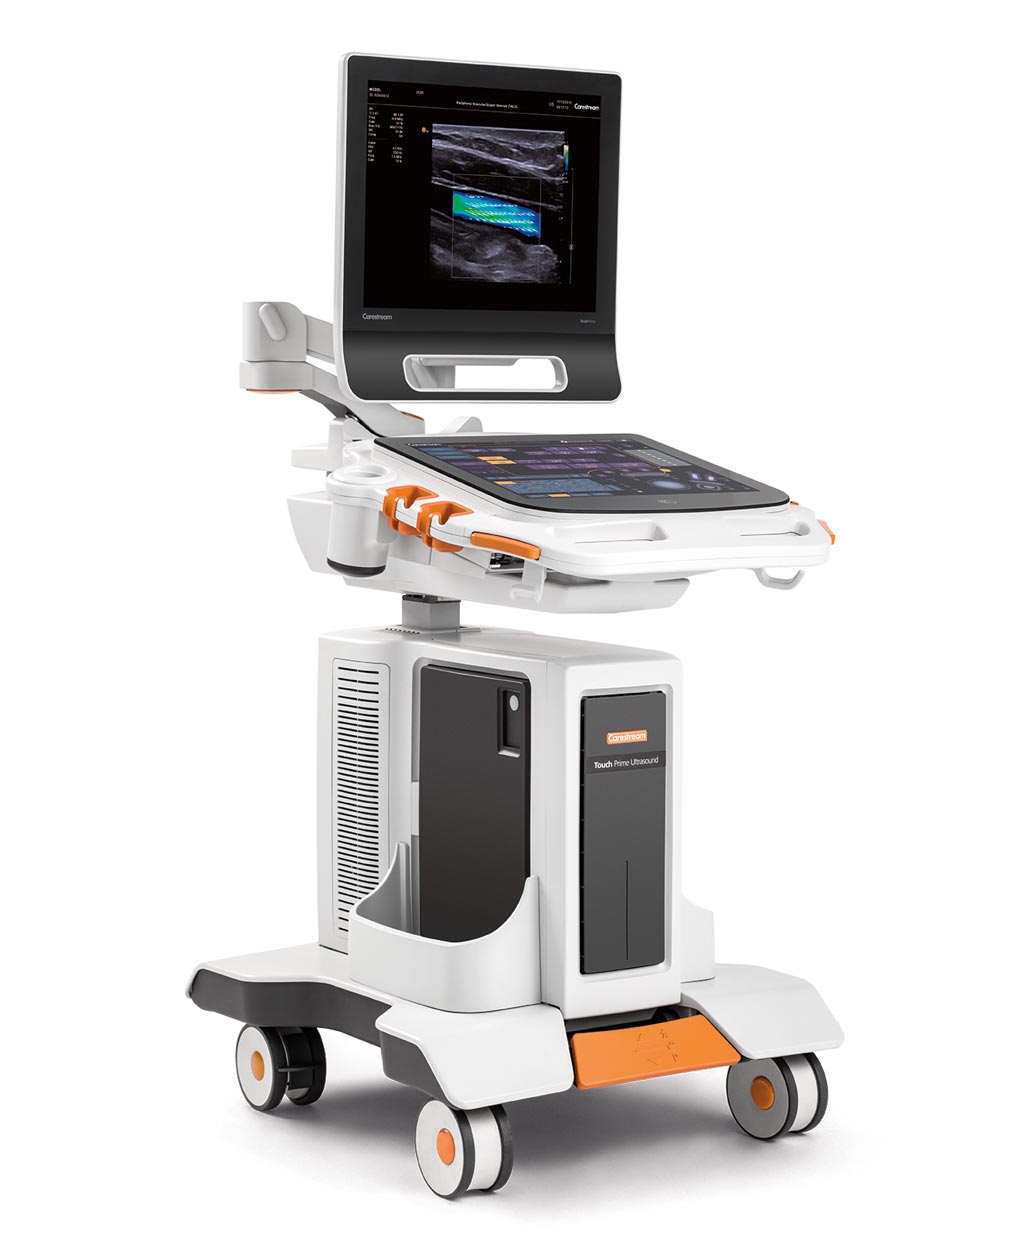 Image: The Touch Prime XE ultrasound system (Photo courtesy of Carestream Health).